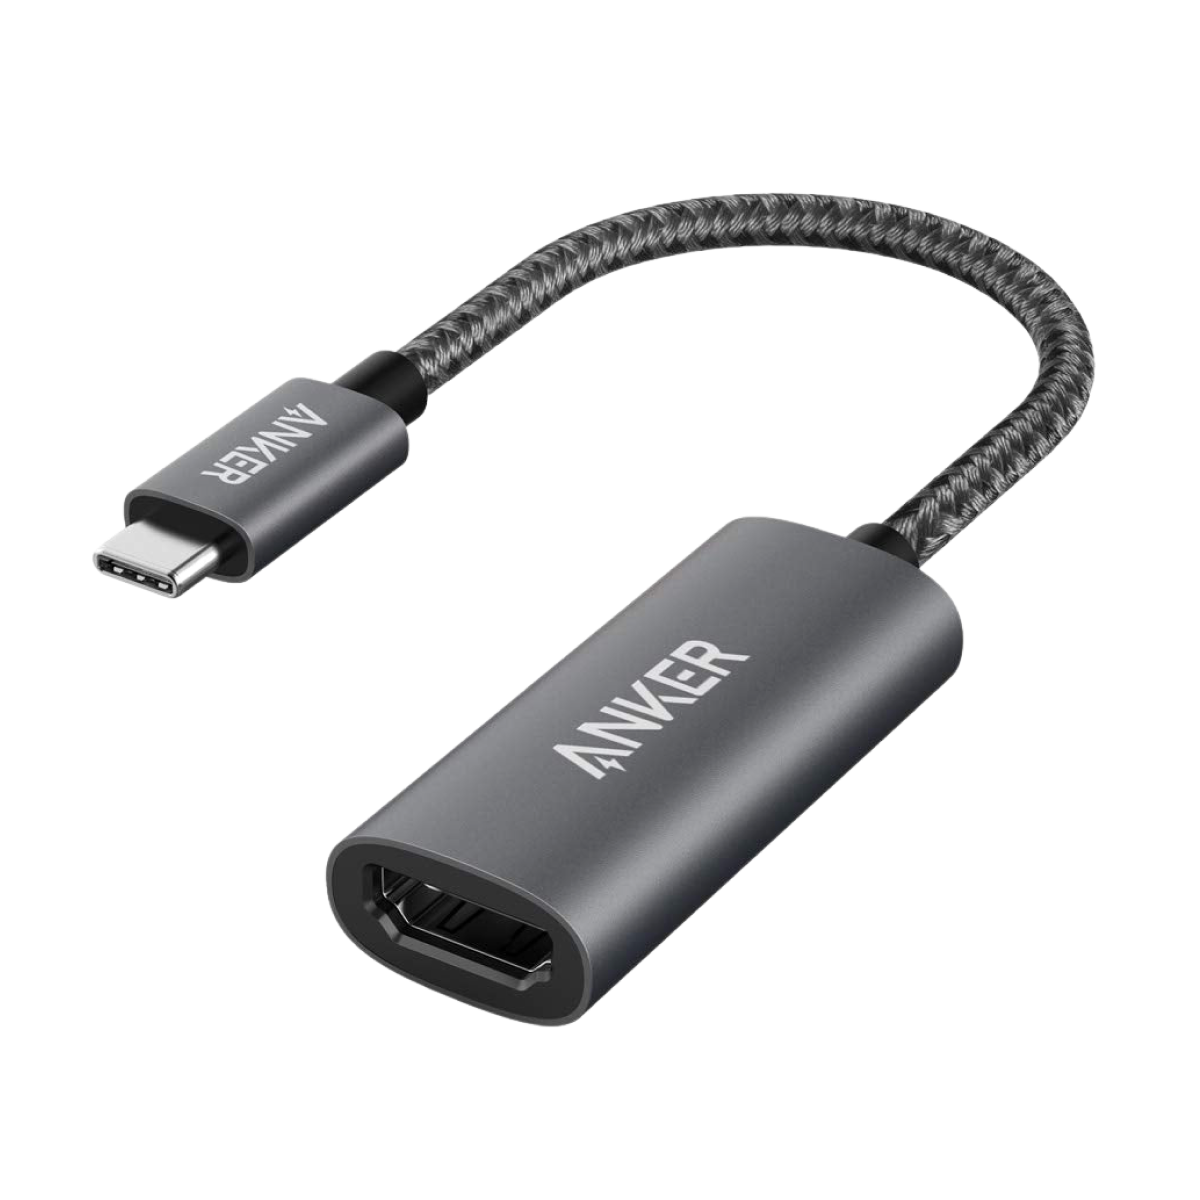 USB Adapters: Power Up, Sync & Stream with Ease - Anker US